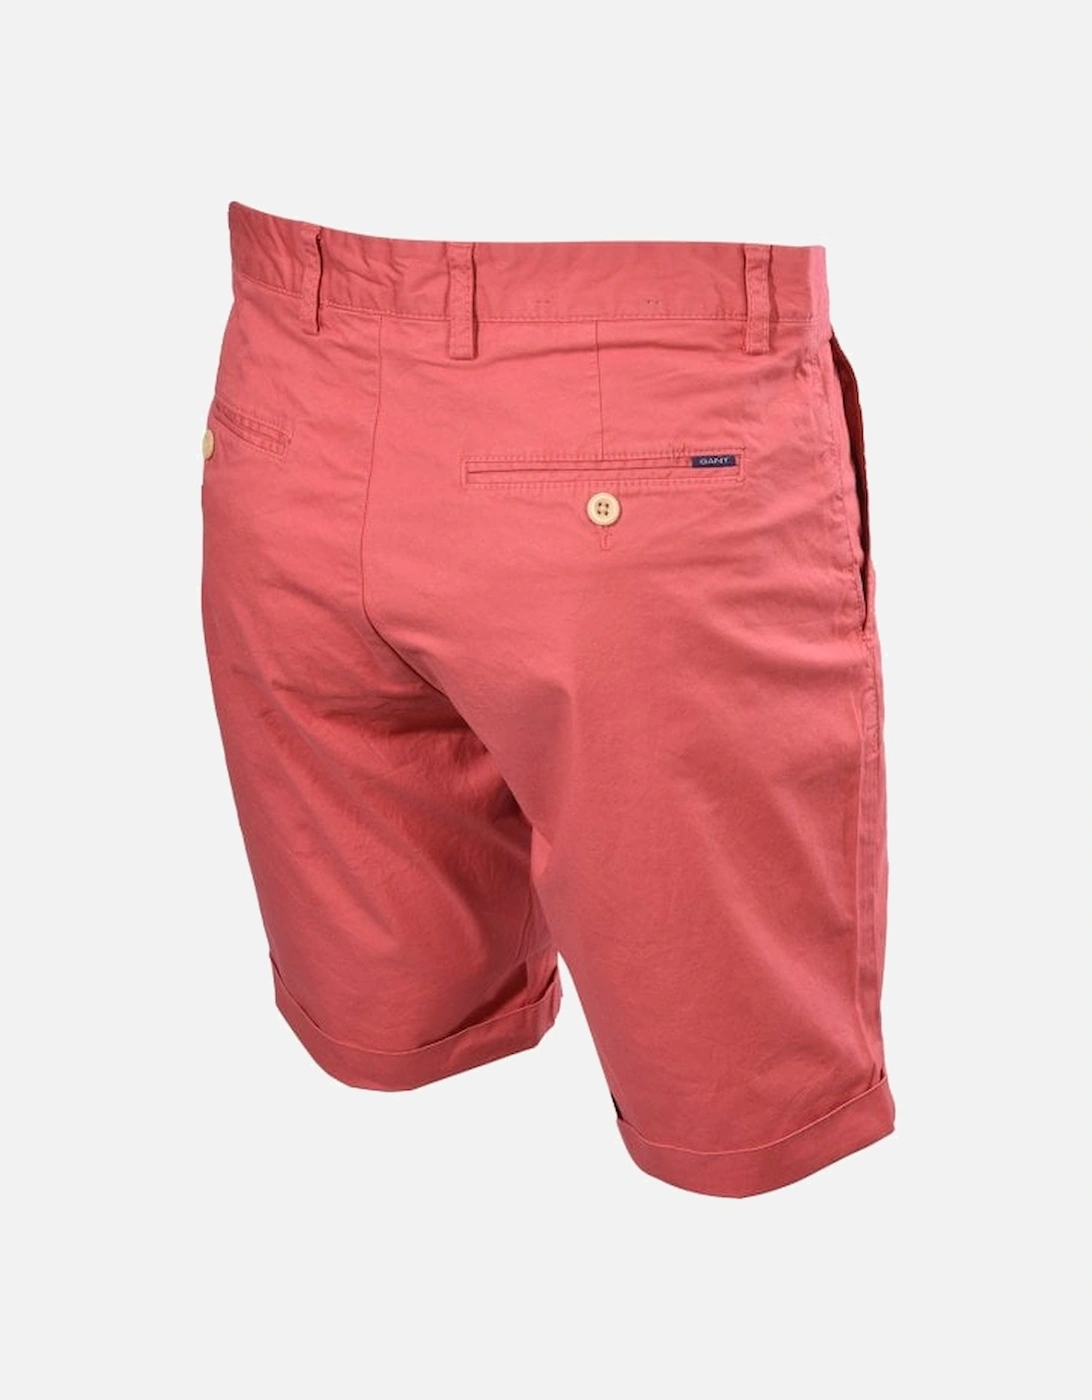 Regular Sunbleached Chino Shorts, Mineral Red